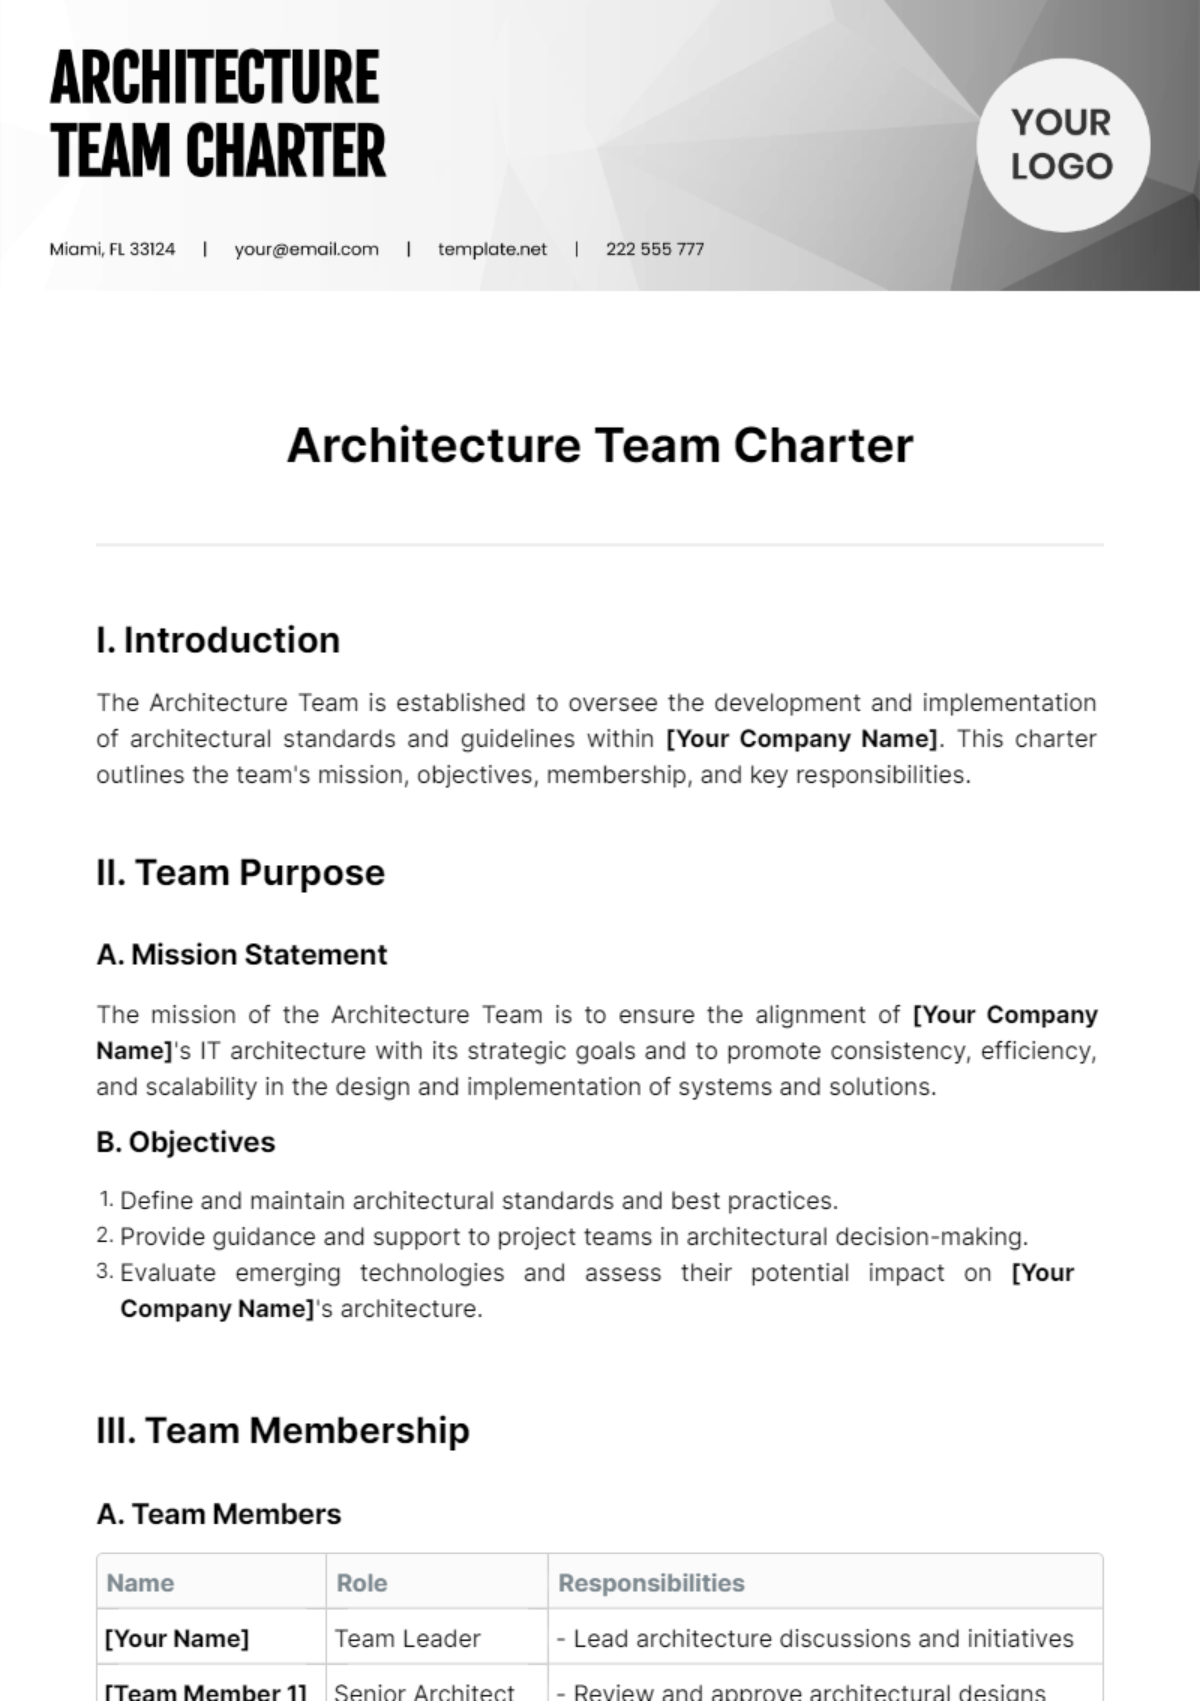 Architecture Team Charter Template